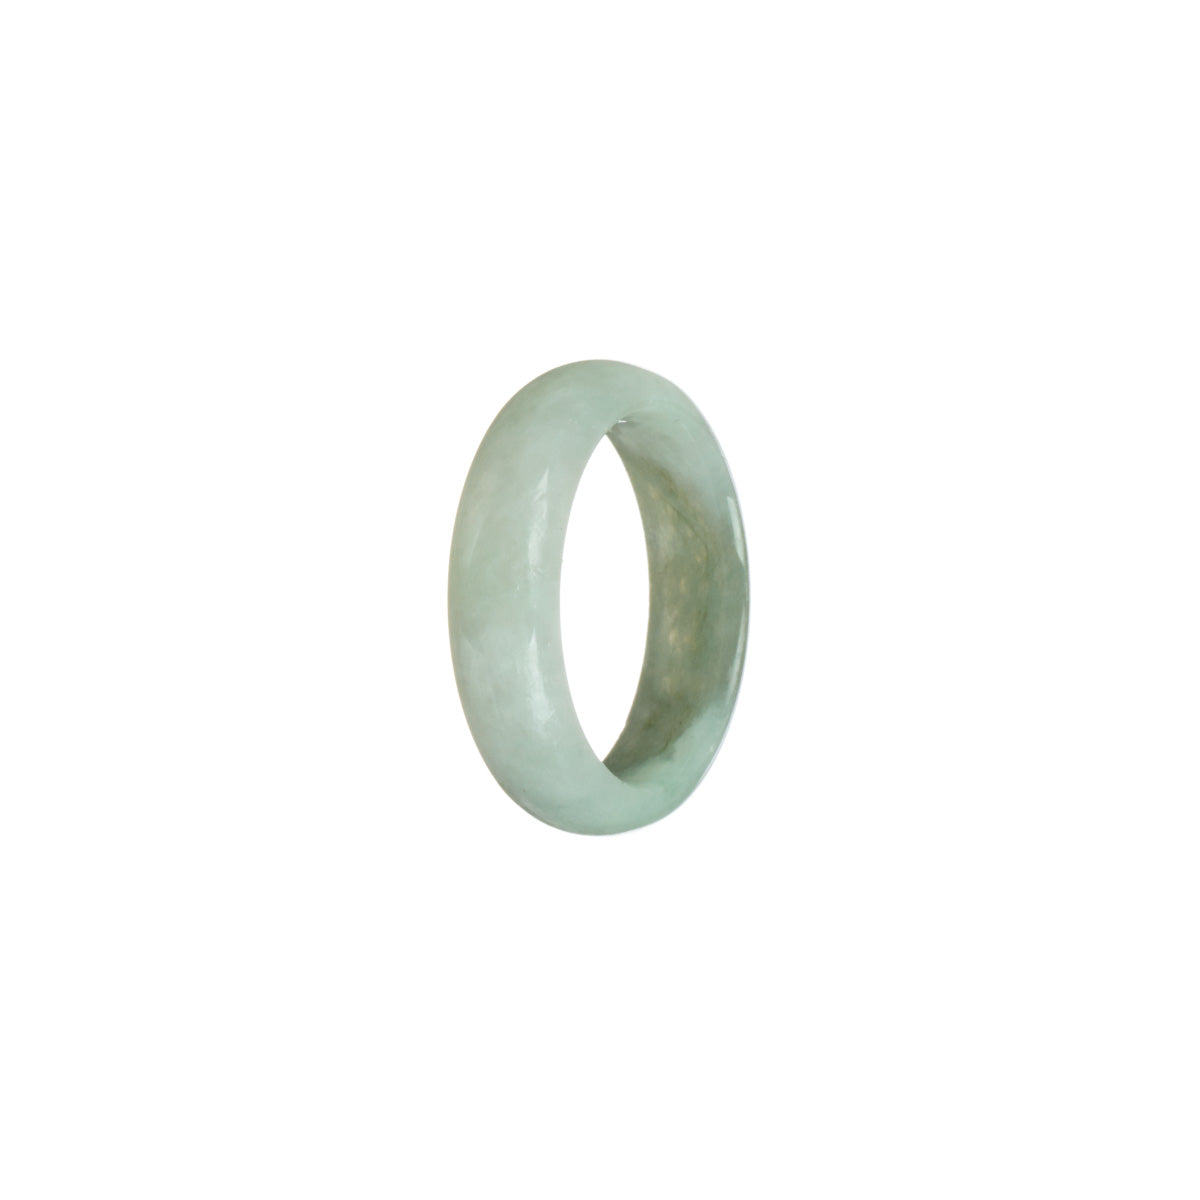 Real White with greyish green Jadeite Jade Ring- Size S